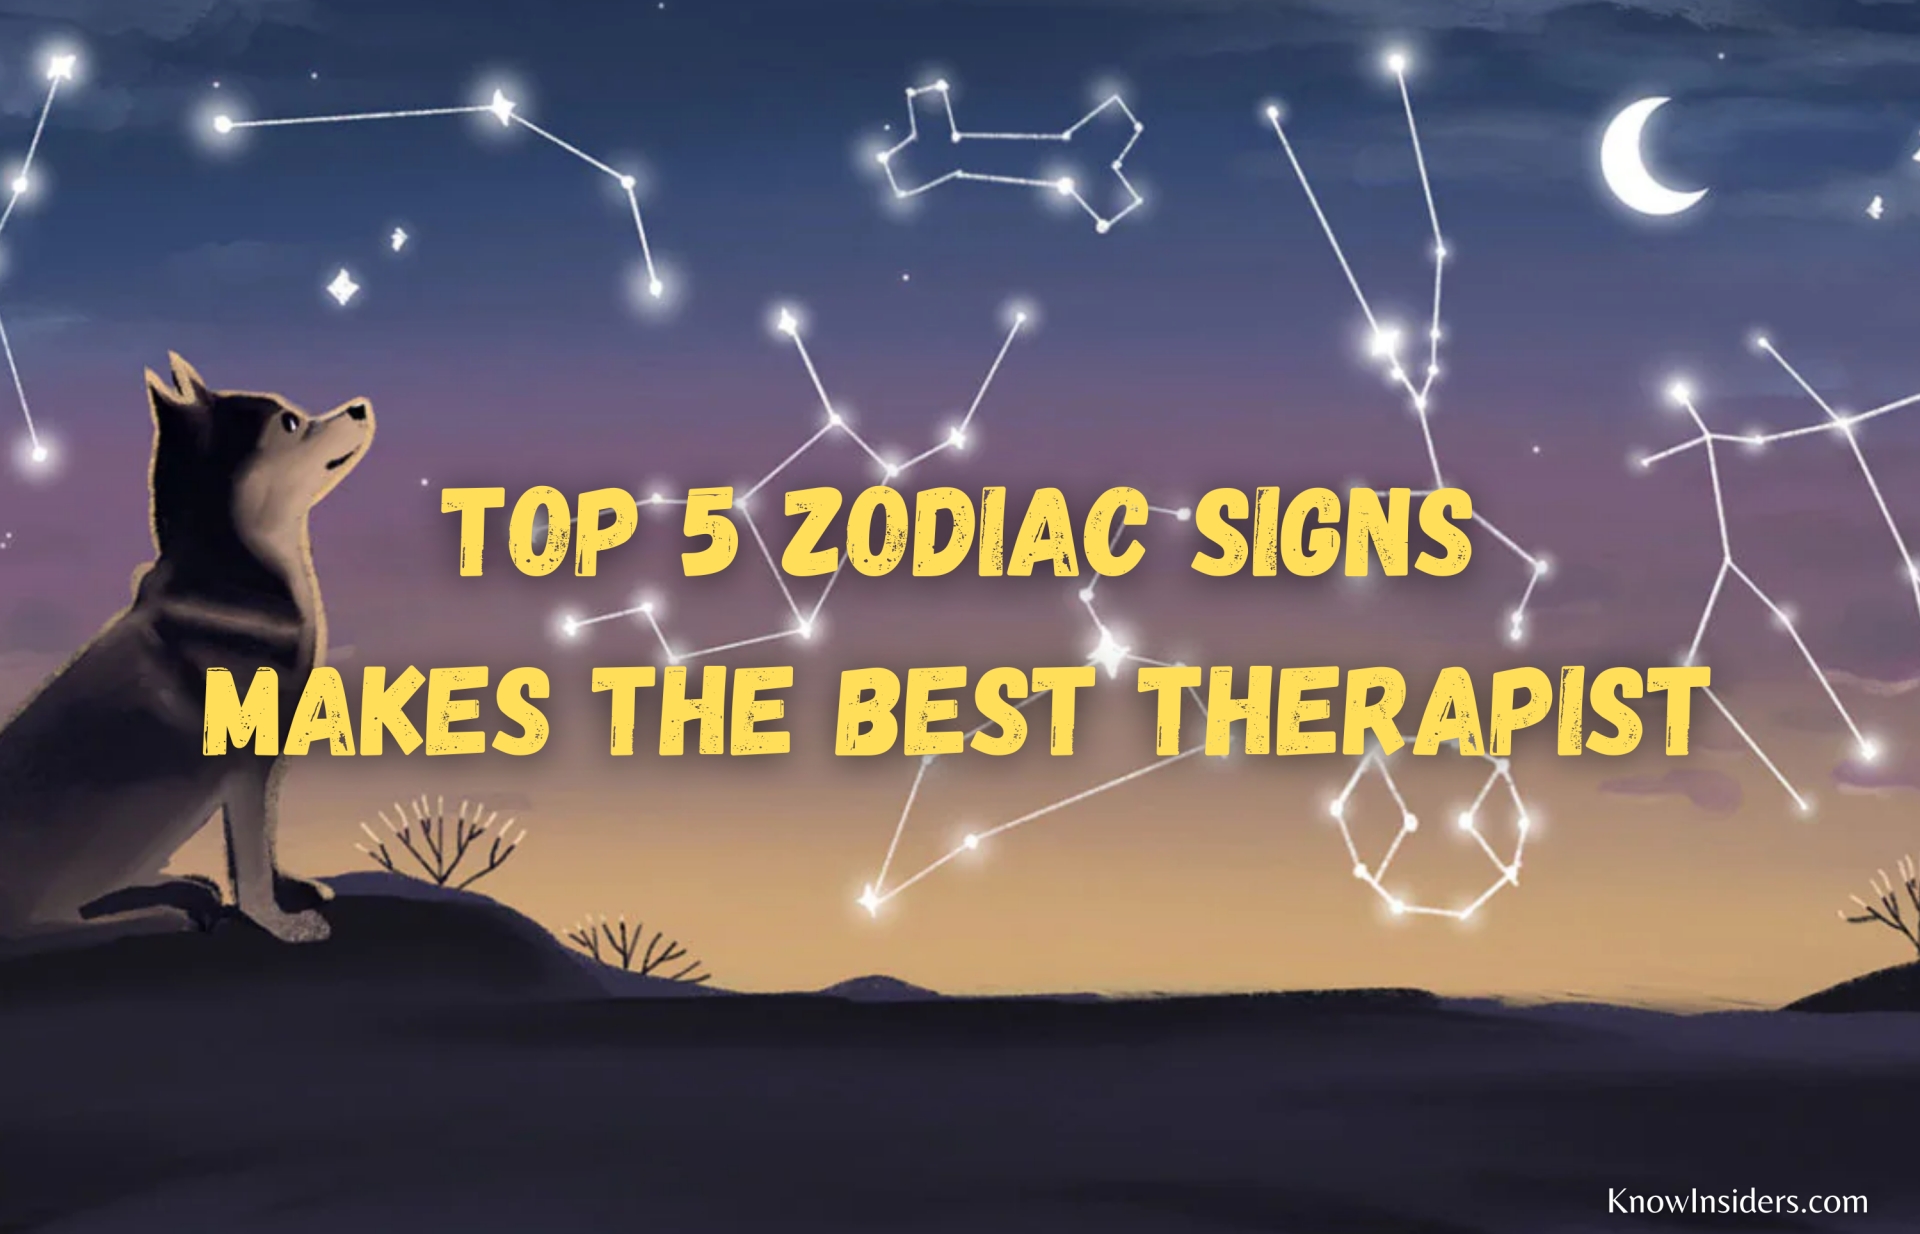 Top 5 Zodiac Sign Makes The Best Therapist